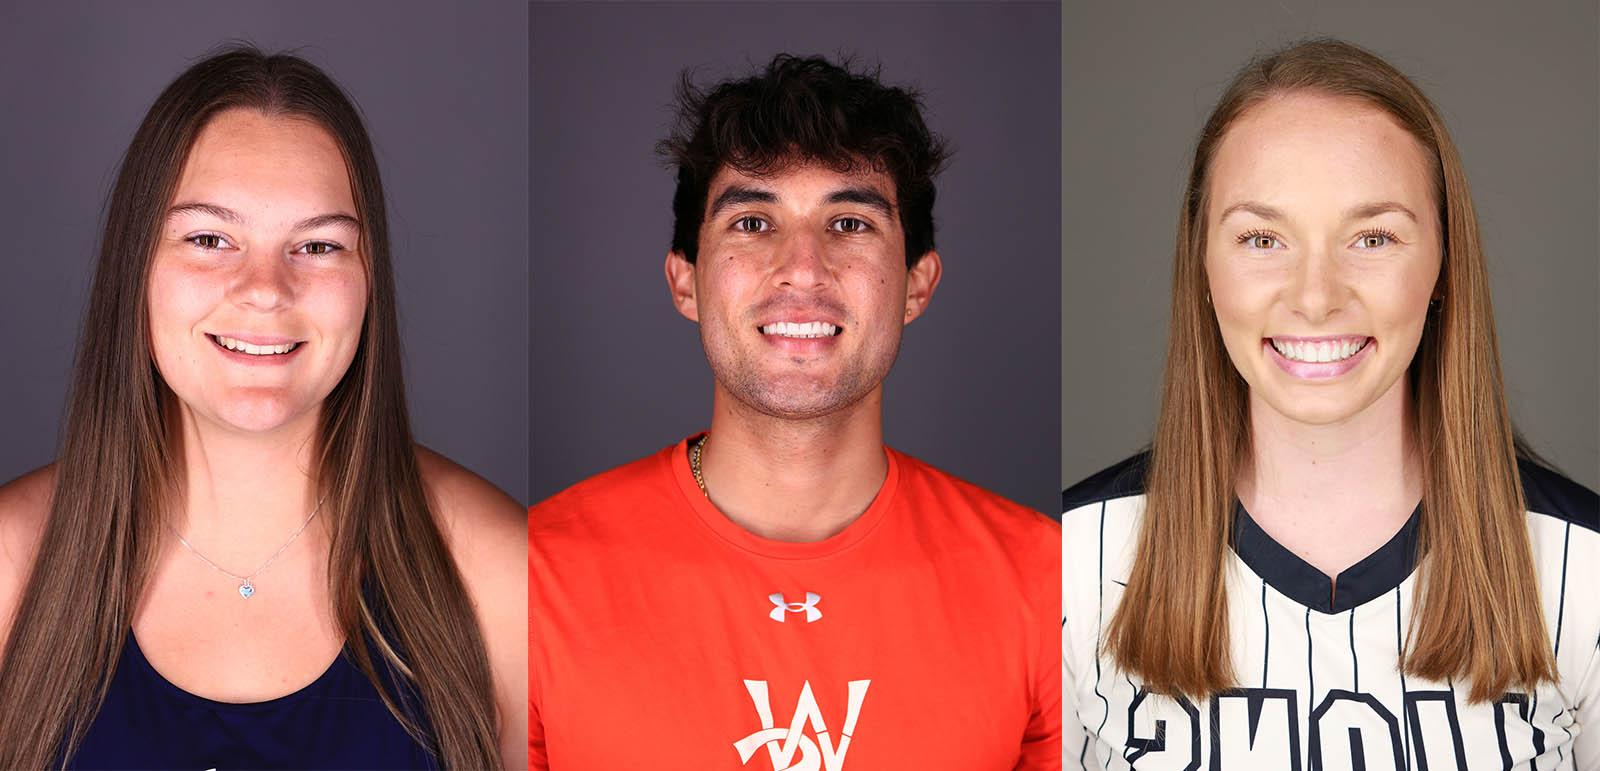 Katie Simon, Sebastian Gamez and Lexi Luders were all recently named Athletes of the Week by the Alabama Community College Conference.